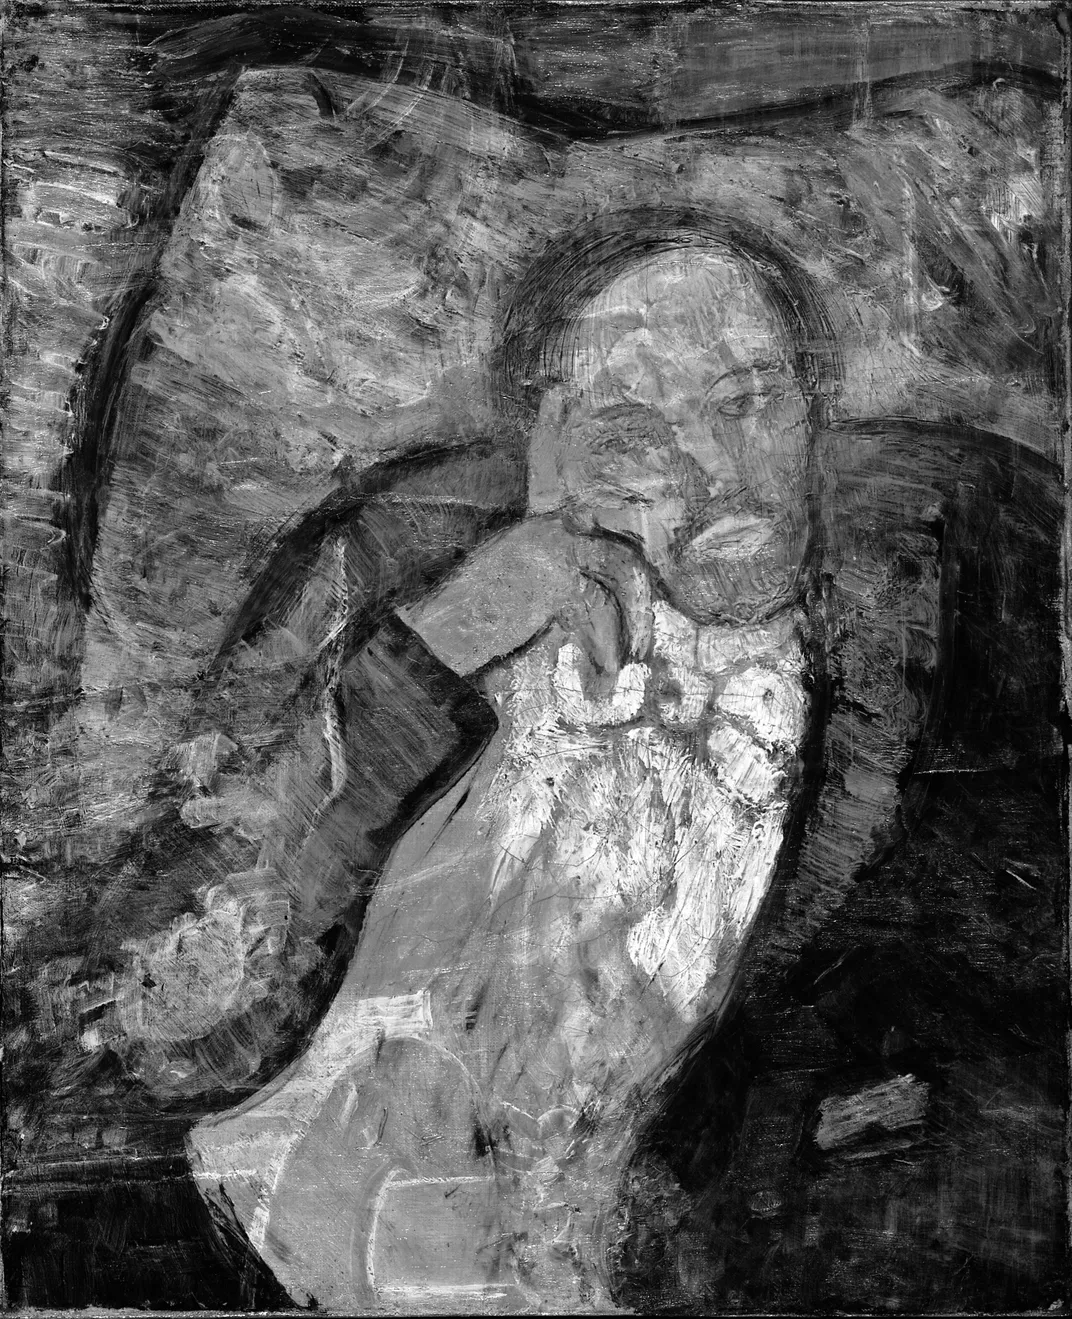 An infrared scan of Picasso's "The Blue Room" reveals the portrait of an unknown man underneath